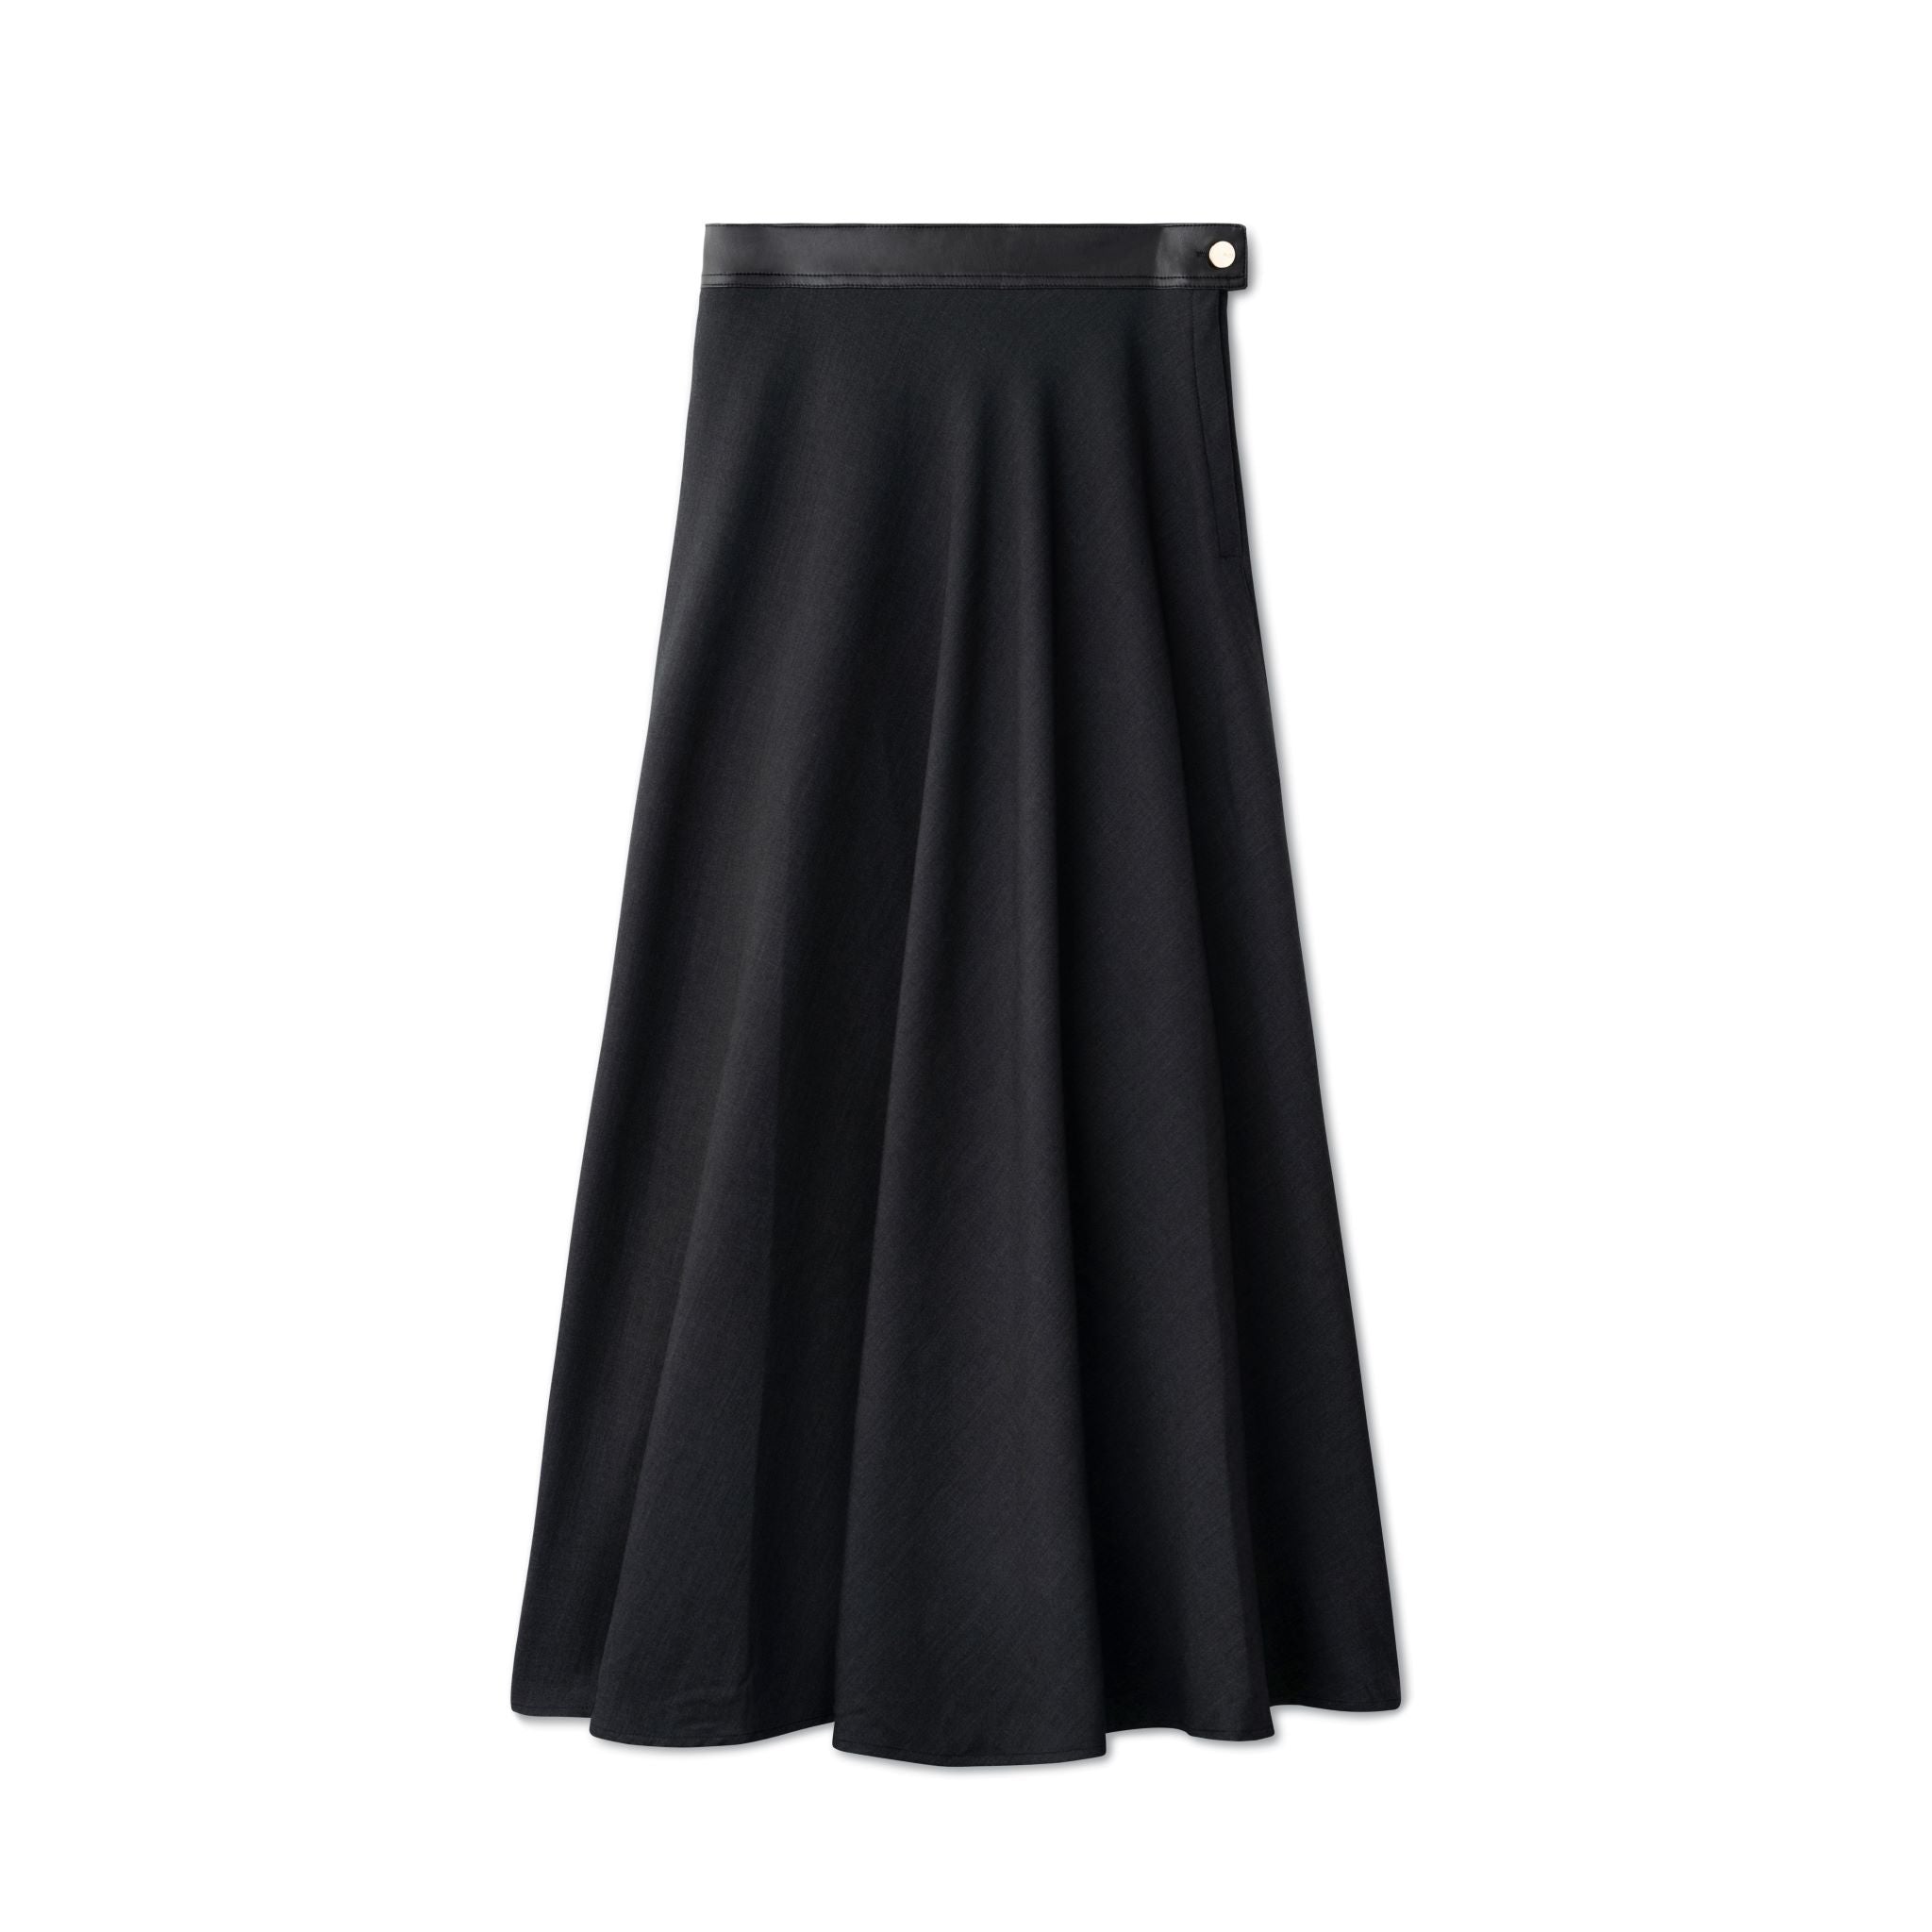 Signature Circle Skirt with Leather Waist Band IN: Black – IN:05NY